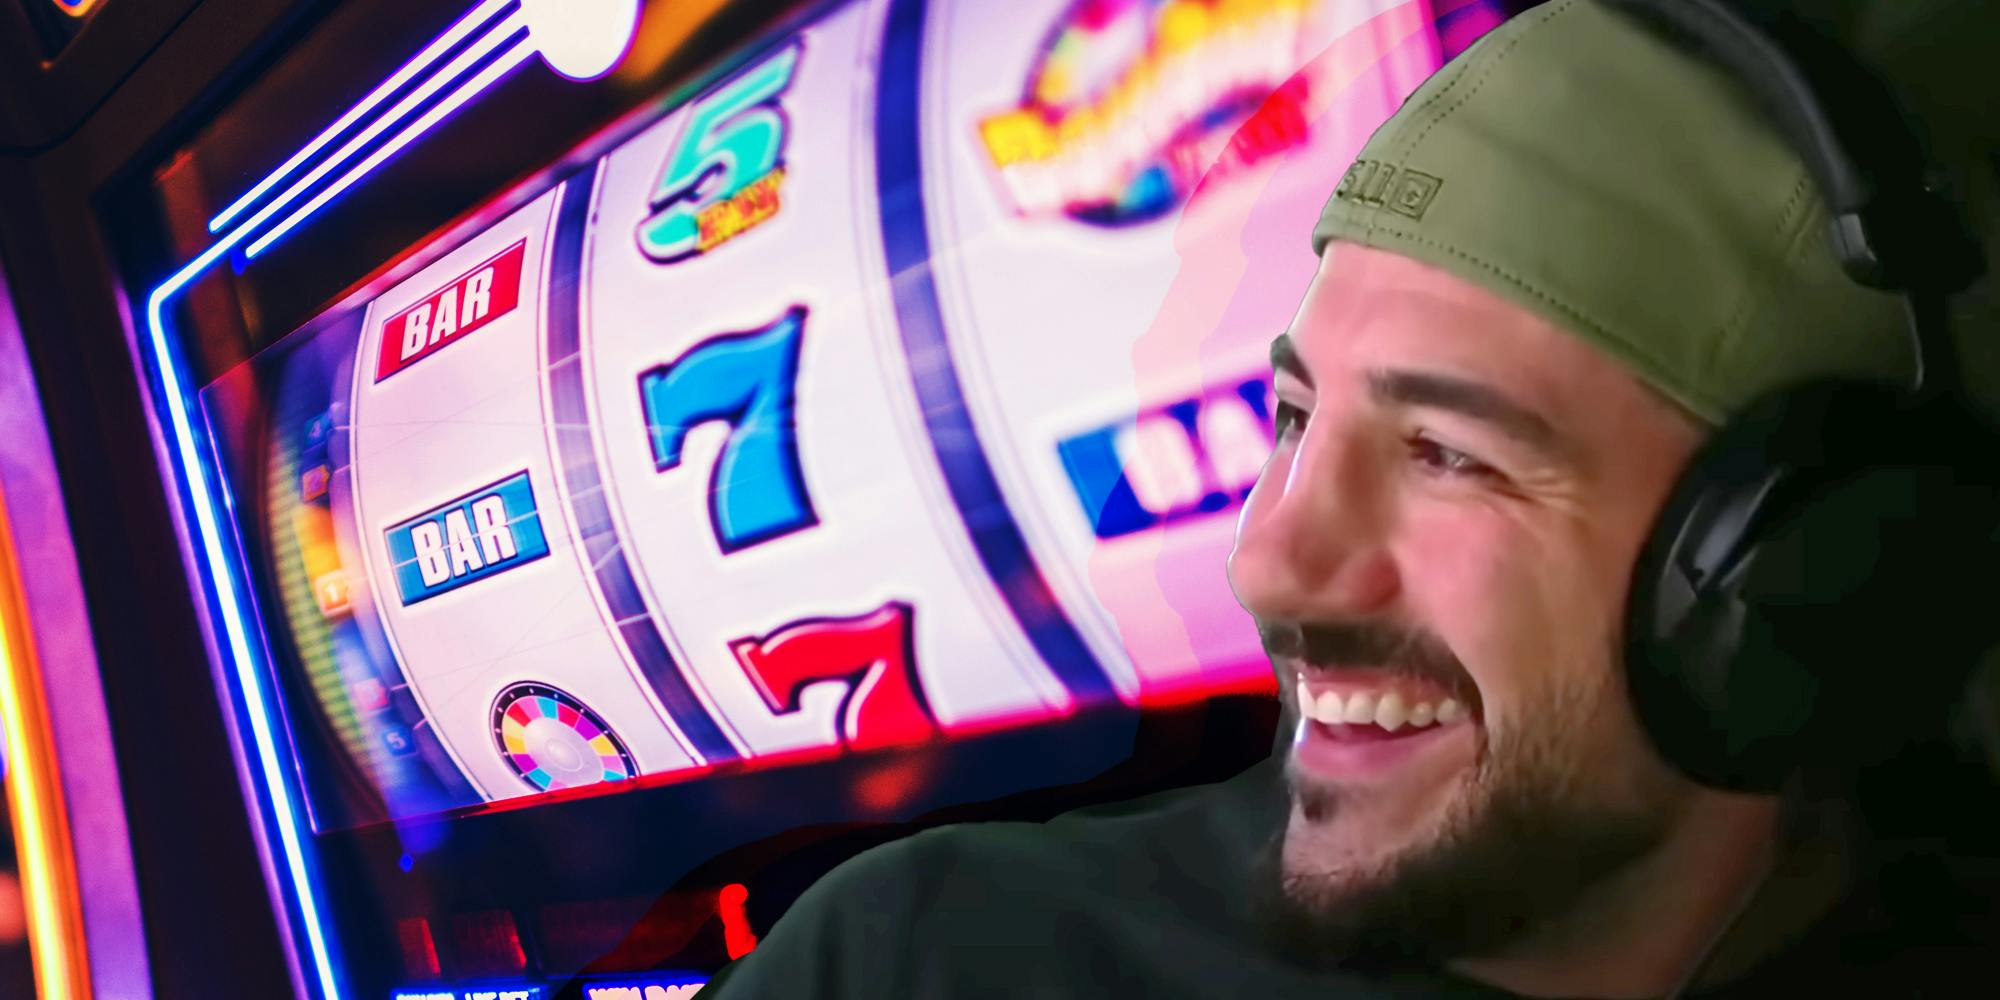 Nickmercs Controversy Shows That Streaming Platform Kick Is Still for Gambling